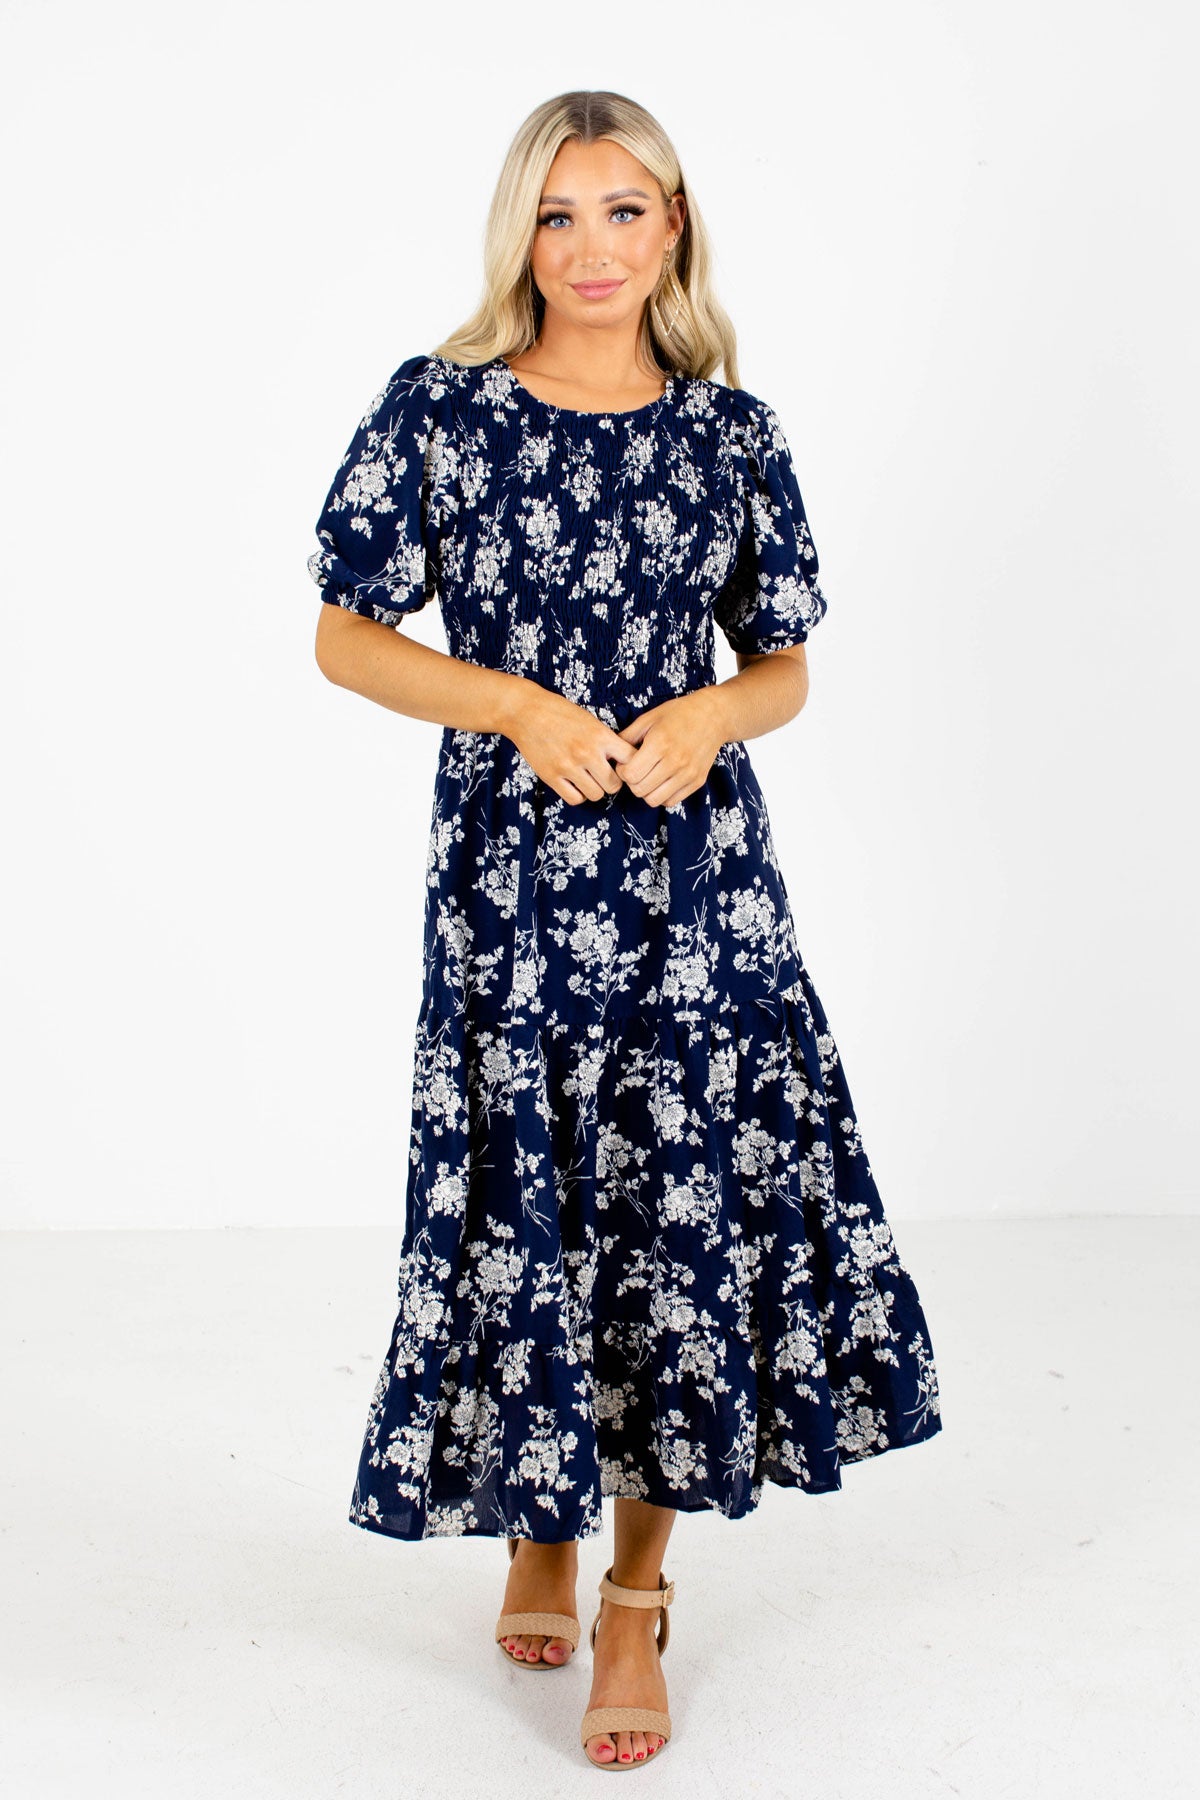 Navy Midi Dress Boutique Clothing for Women